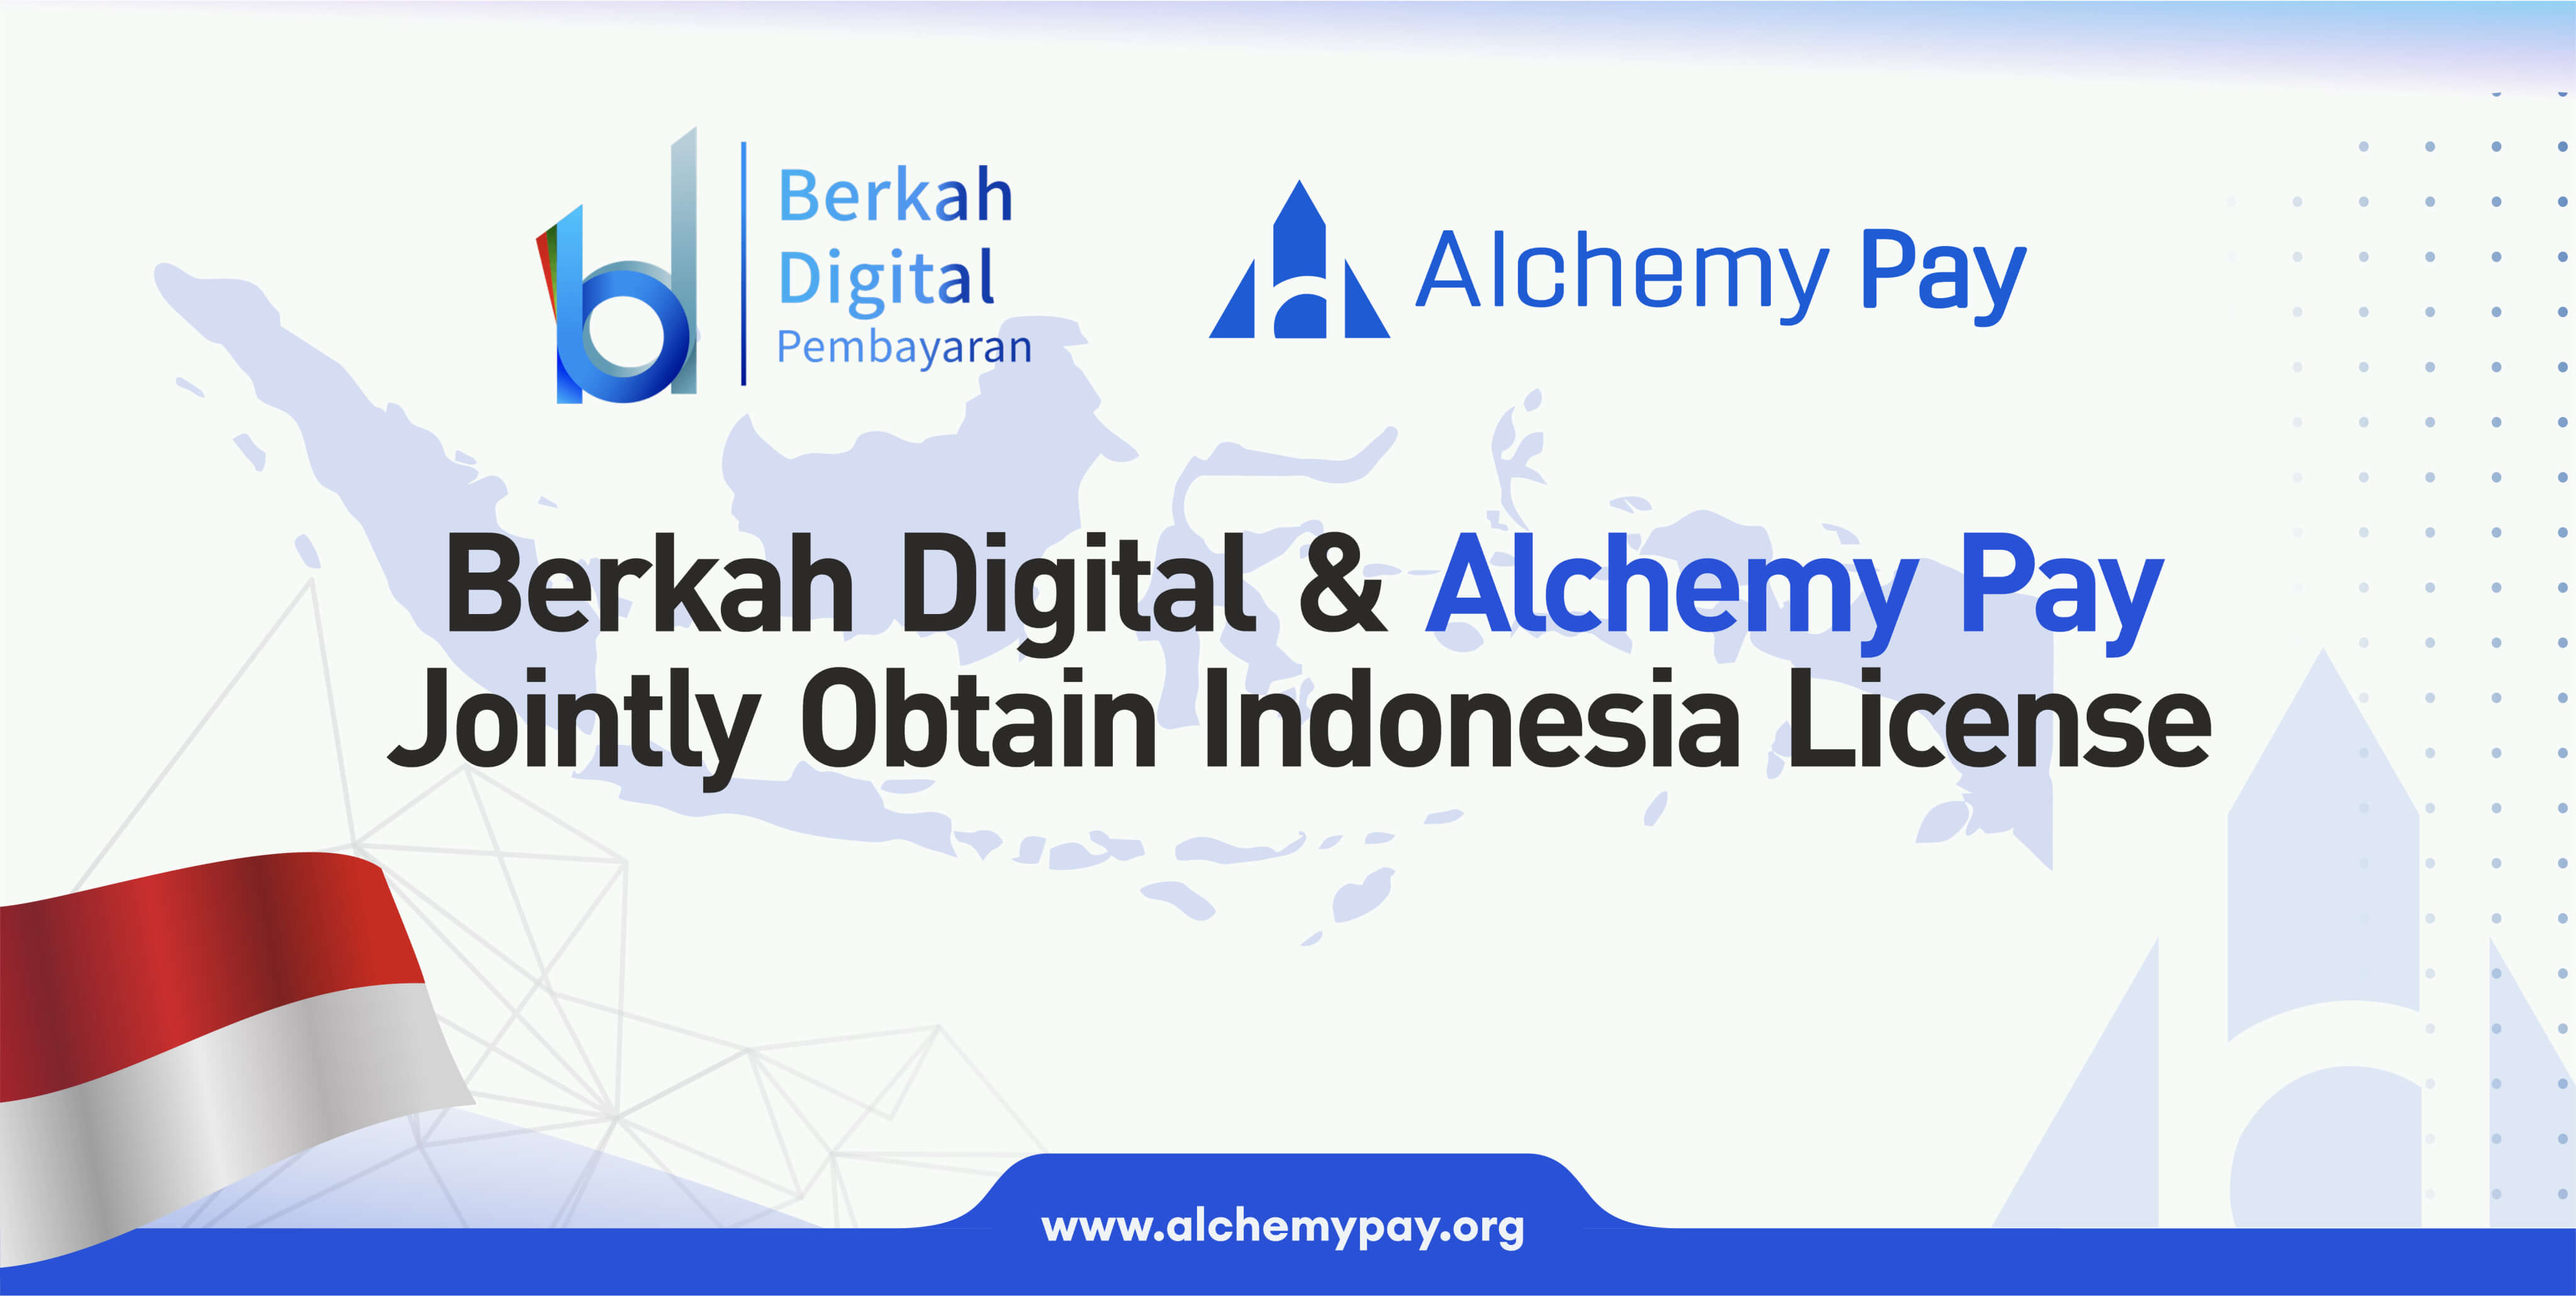 Berkah Digital and Alchemy Pay Jointly Obtain Indonesia License